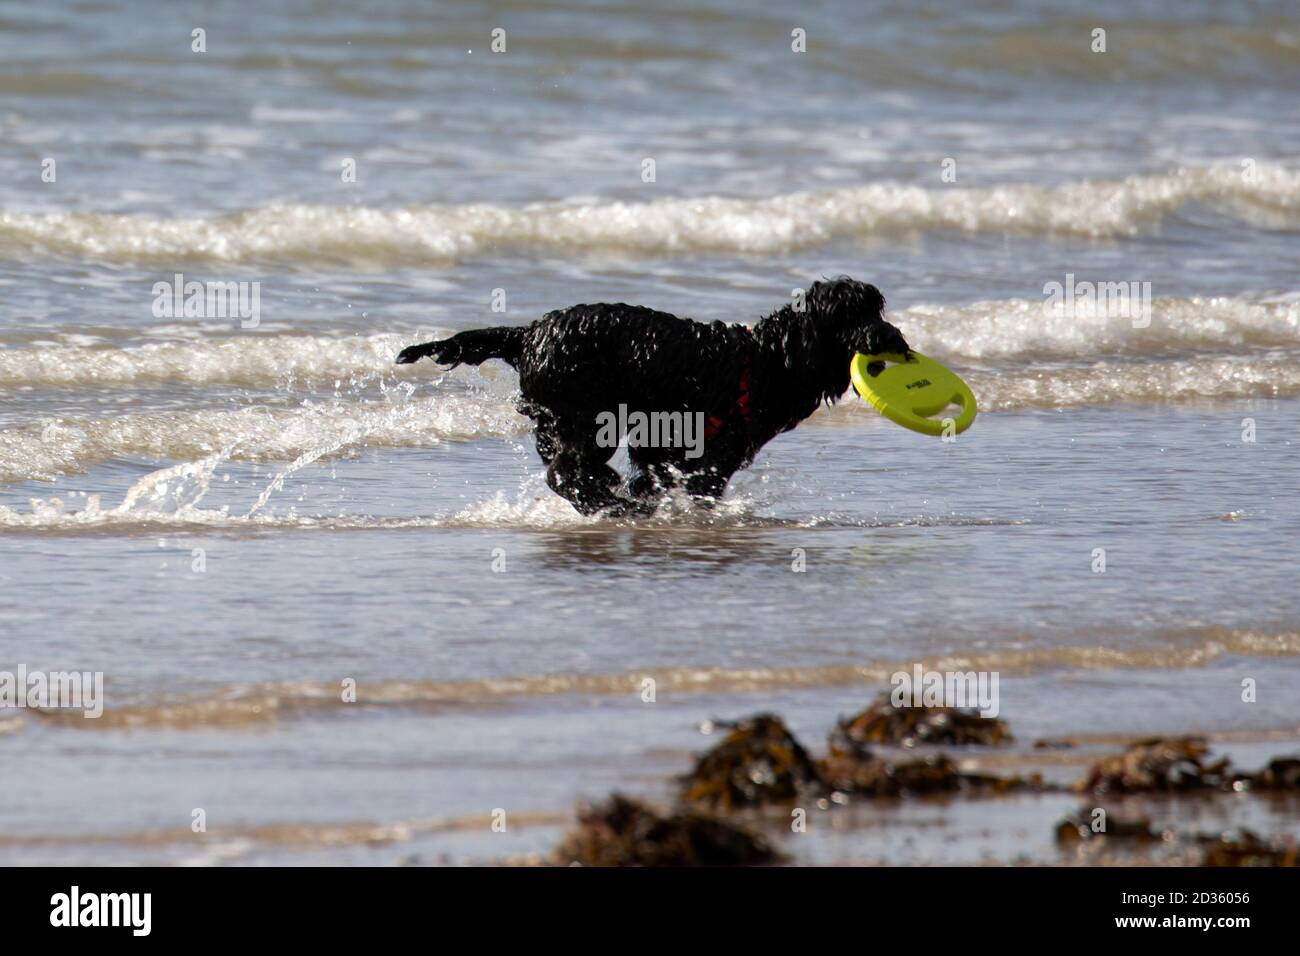 Newborough, Anglesey, North Wales, UK. UK Weather: 7th October 2020 a fine warm day on Anglesey in between weather fronts, with another rain front expected to hit the UK on Friday. A dog returning from the sea with a frisby on Newborough Beach, Anglesey © DGDImages/AlamyNews Stock Photo